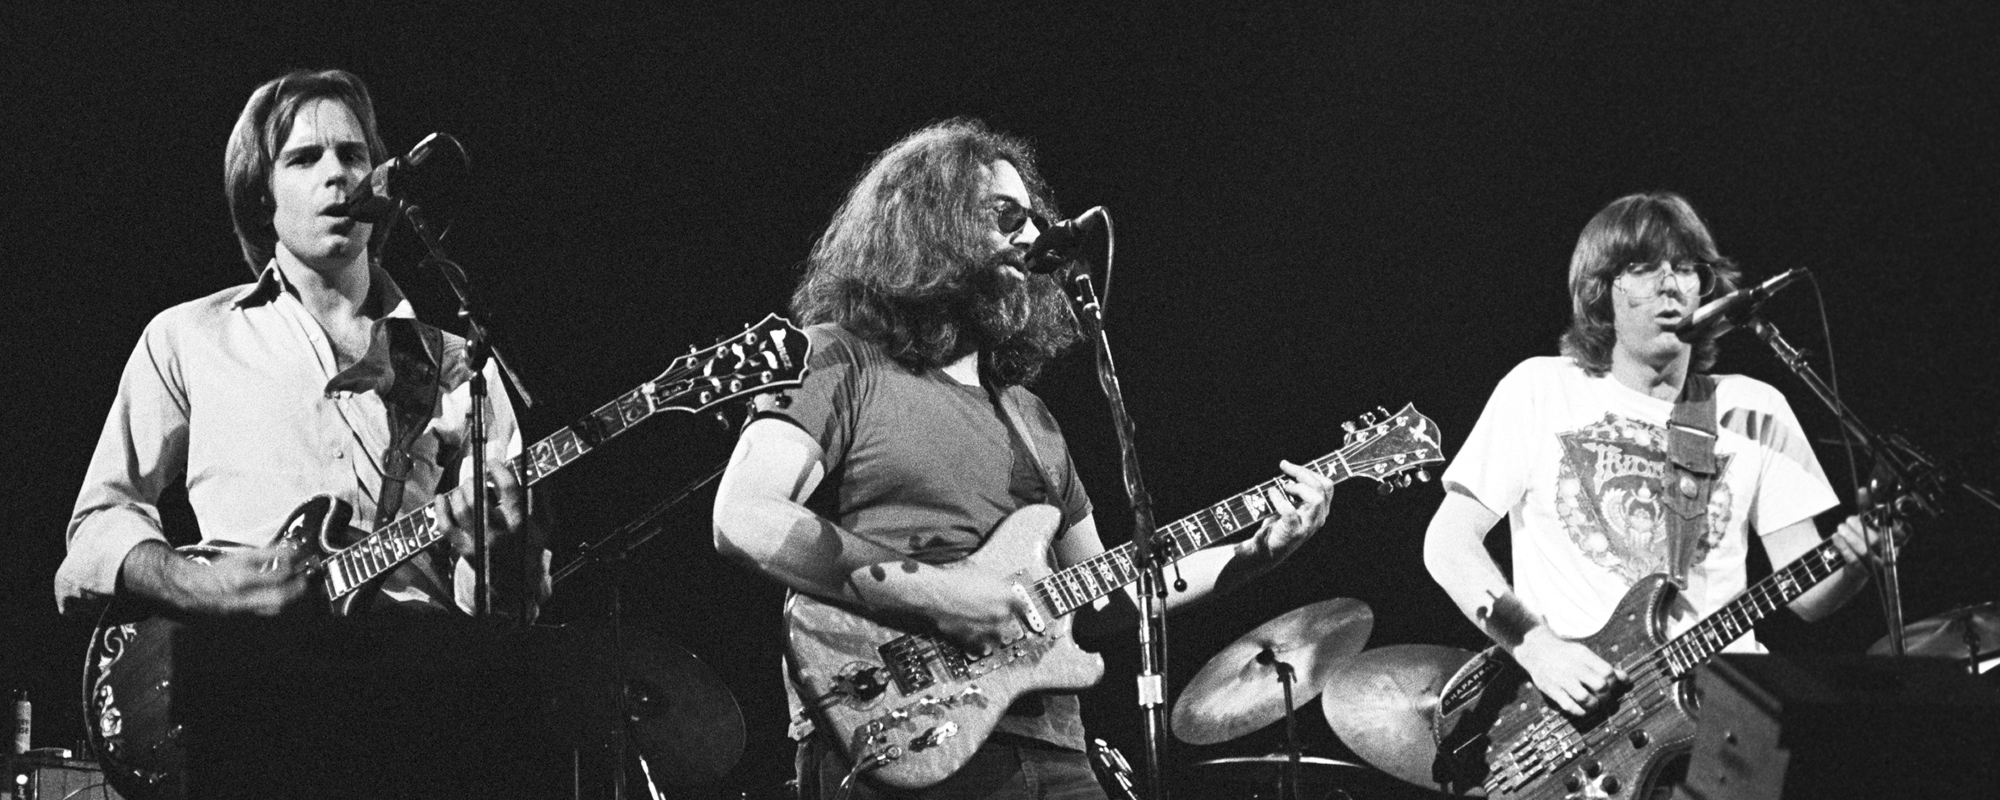 Behind the Meaning of the Logo: The Grateful Dead Bears